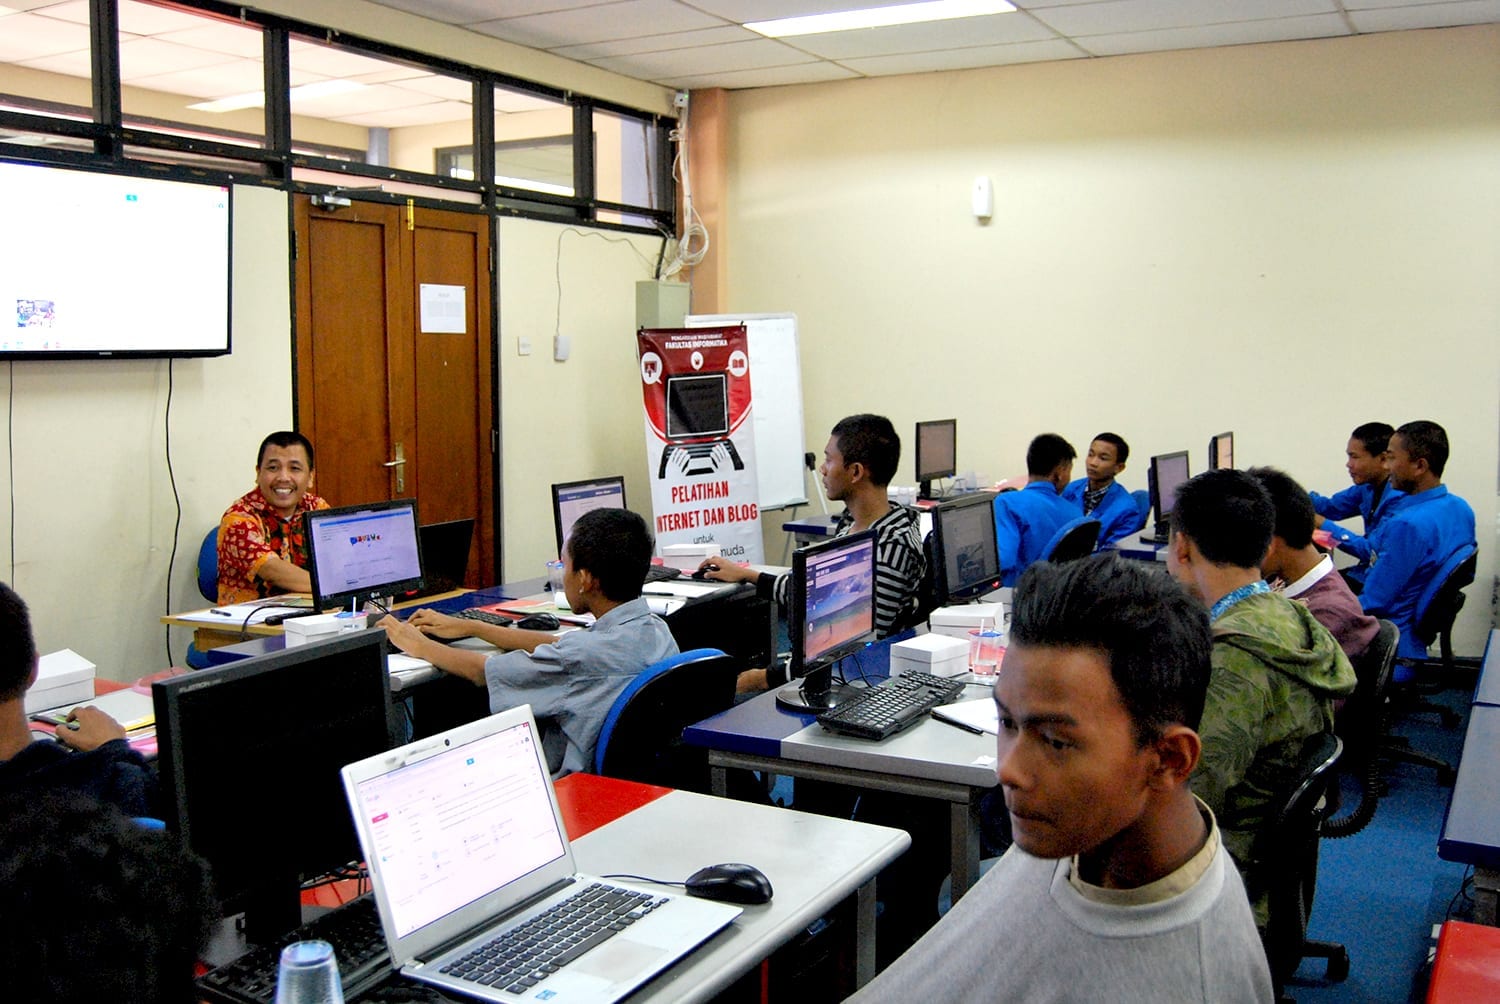 Gallery of Community Service Internet and Blogs Training for Indonesian Mosque Youth Networks